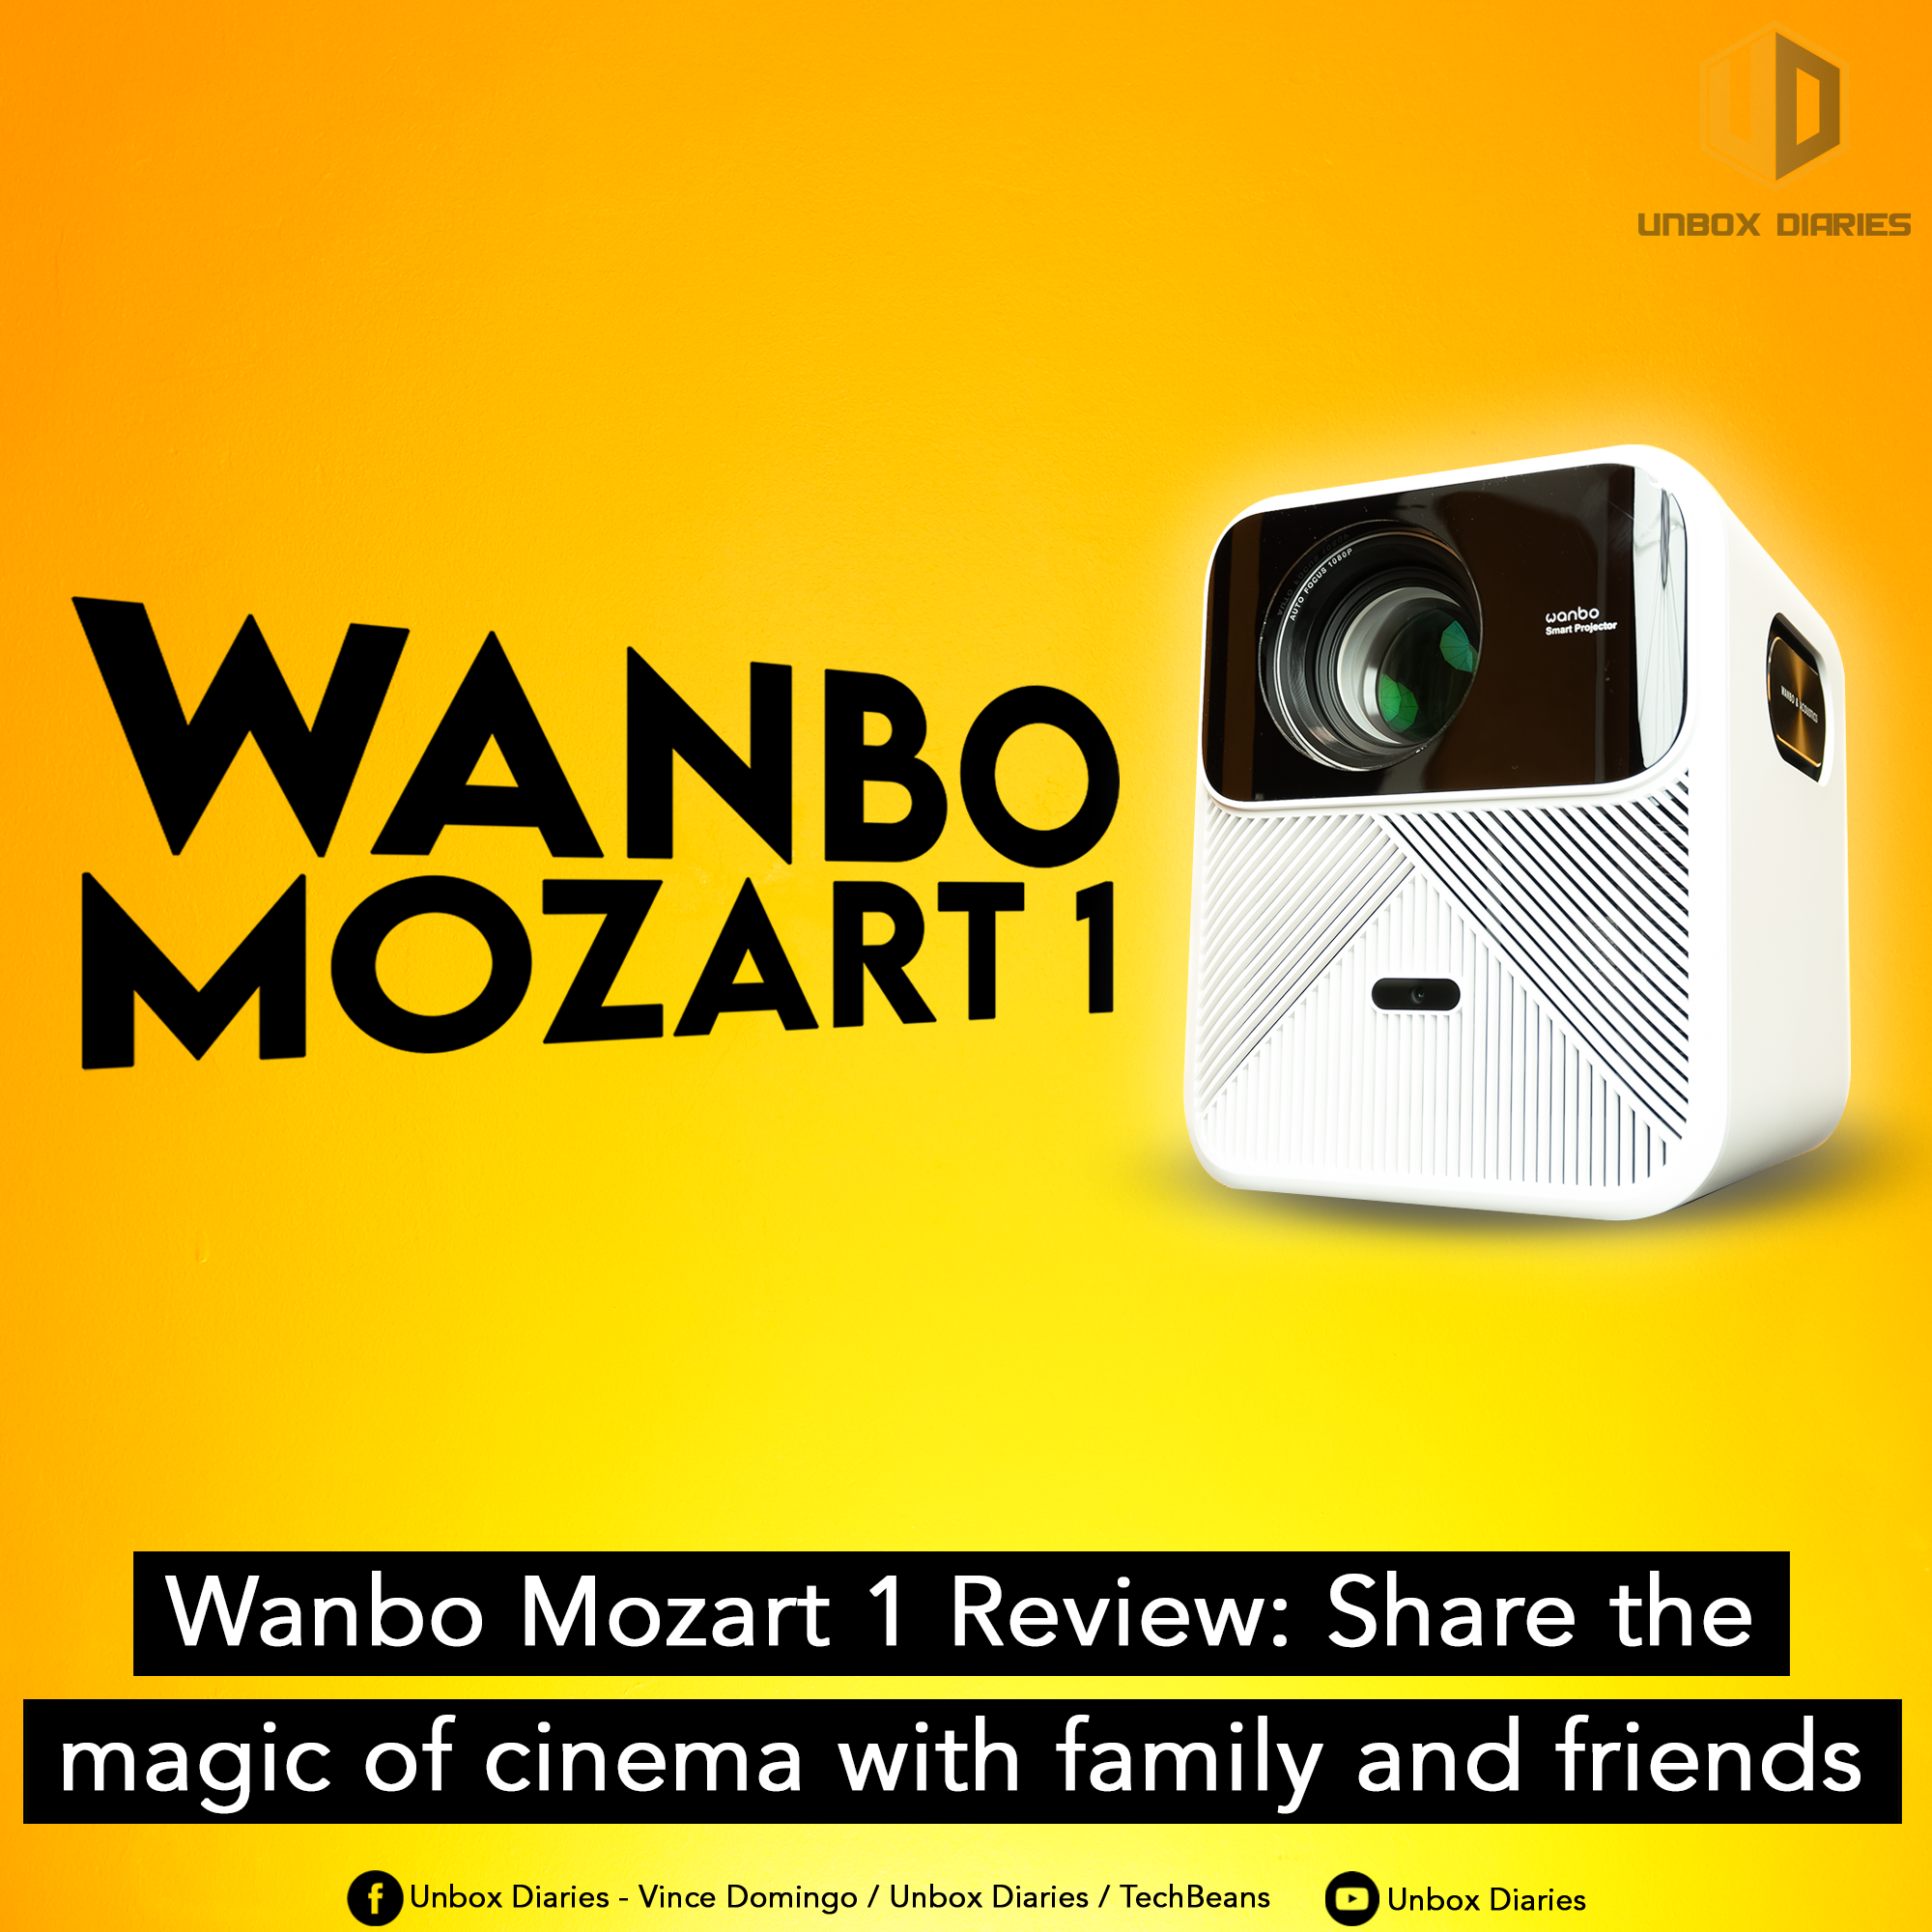 Wanbo Mozart 1 Review: Share the magic of cinema with family and